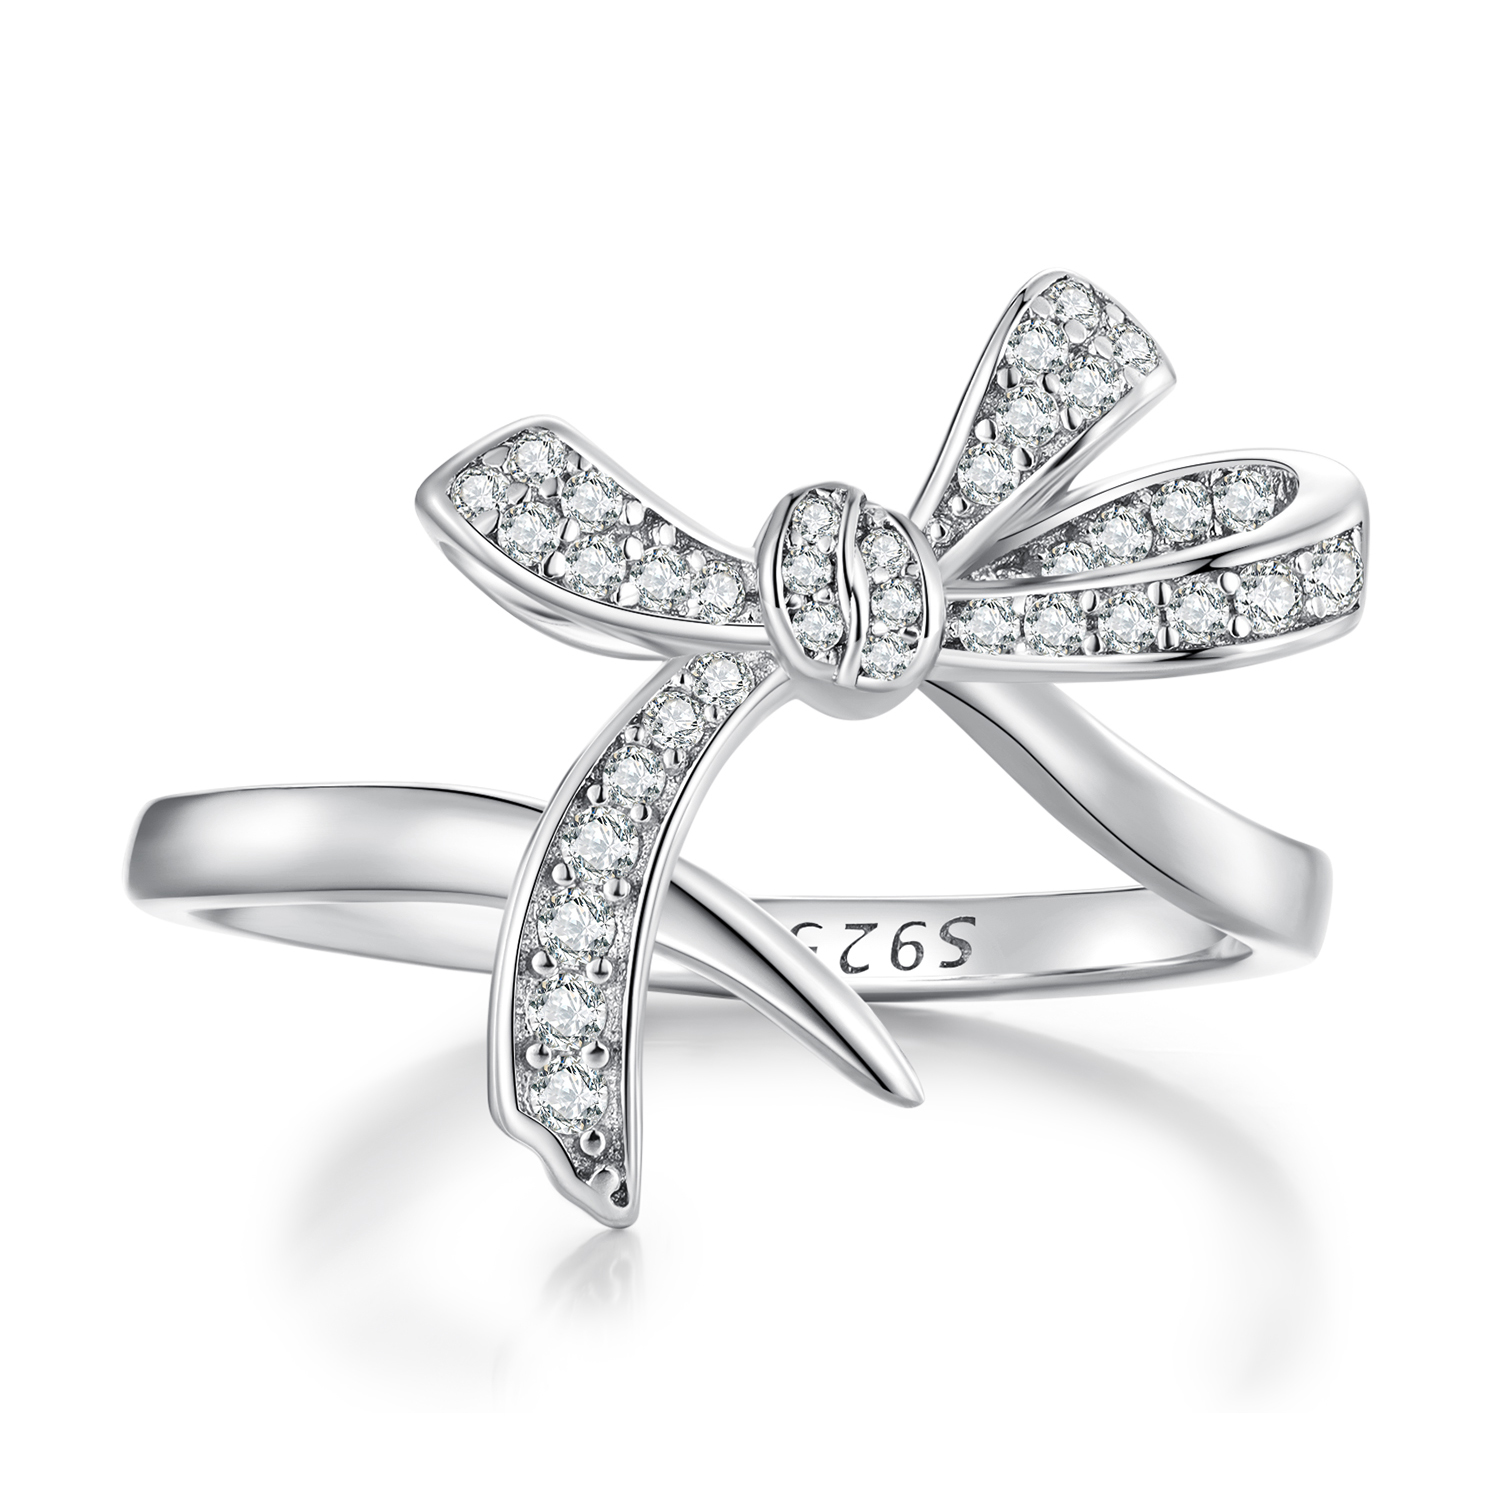 pandora style bow tie open ring bsr435